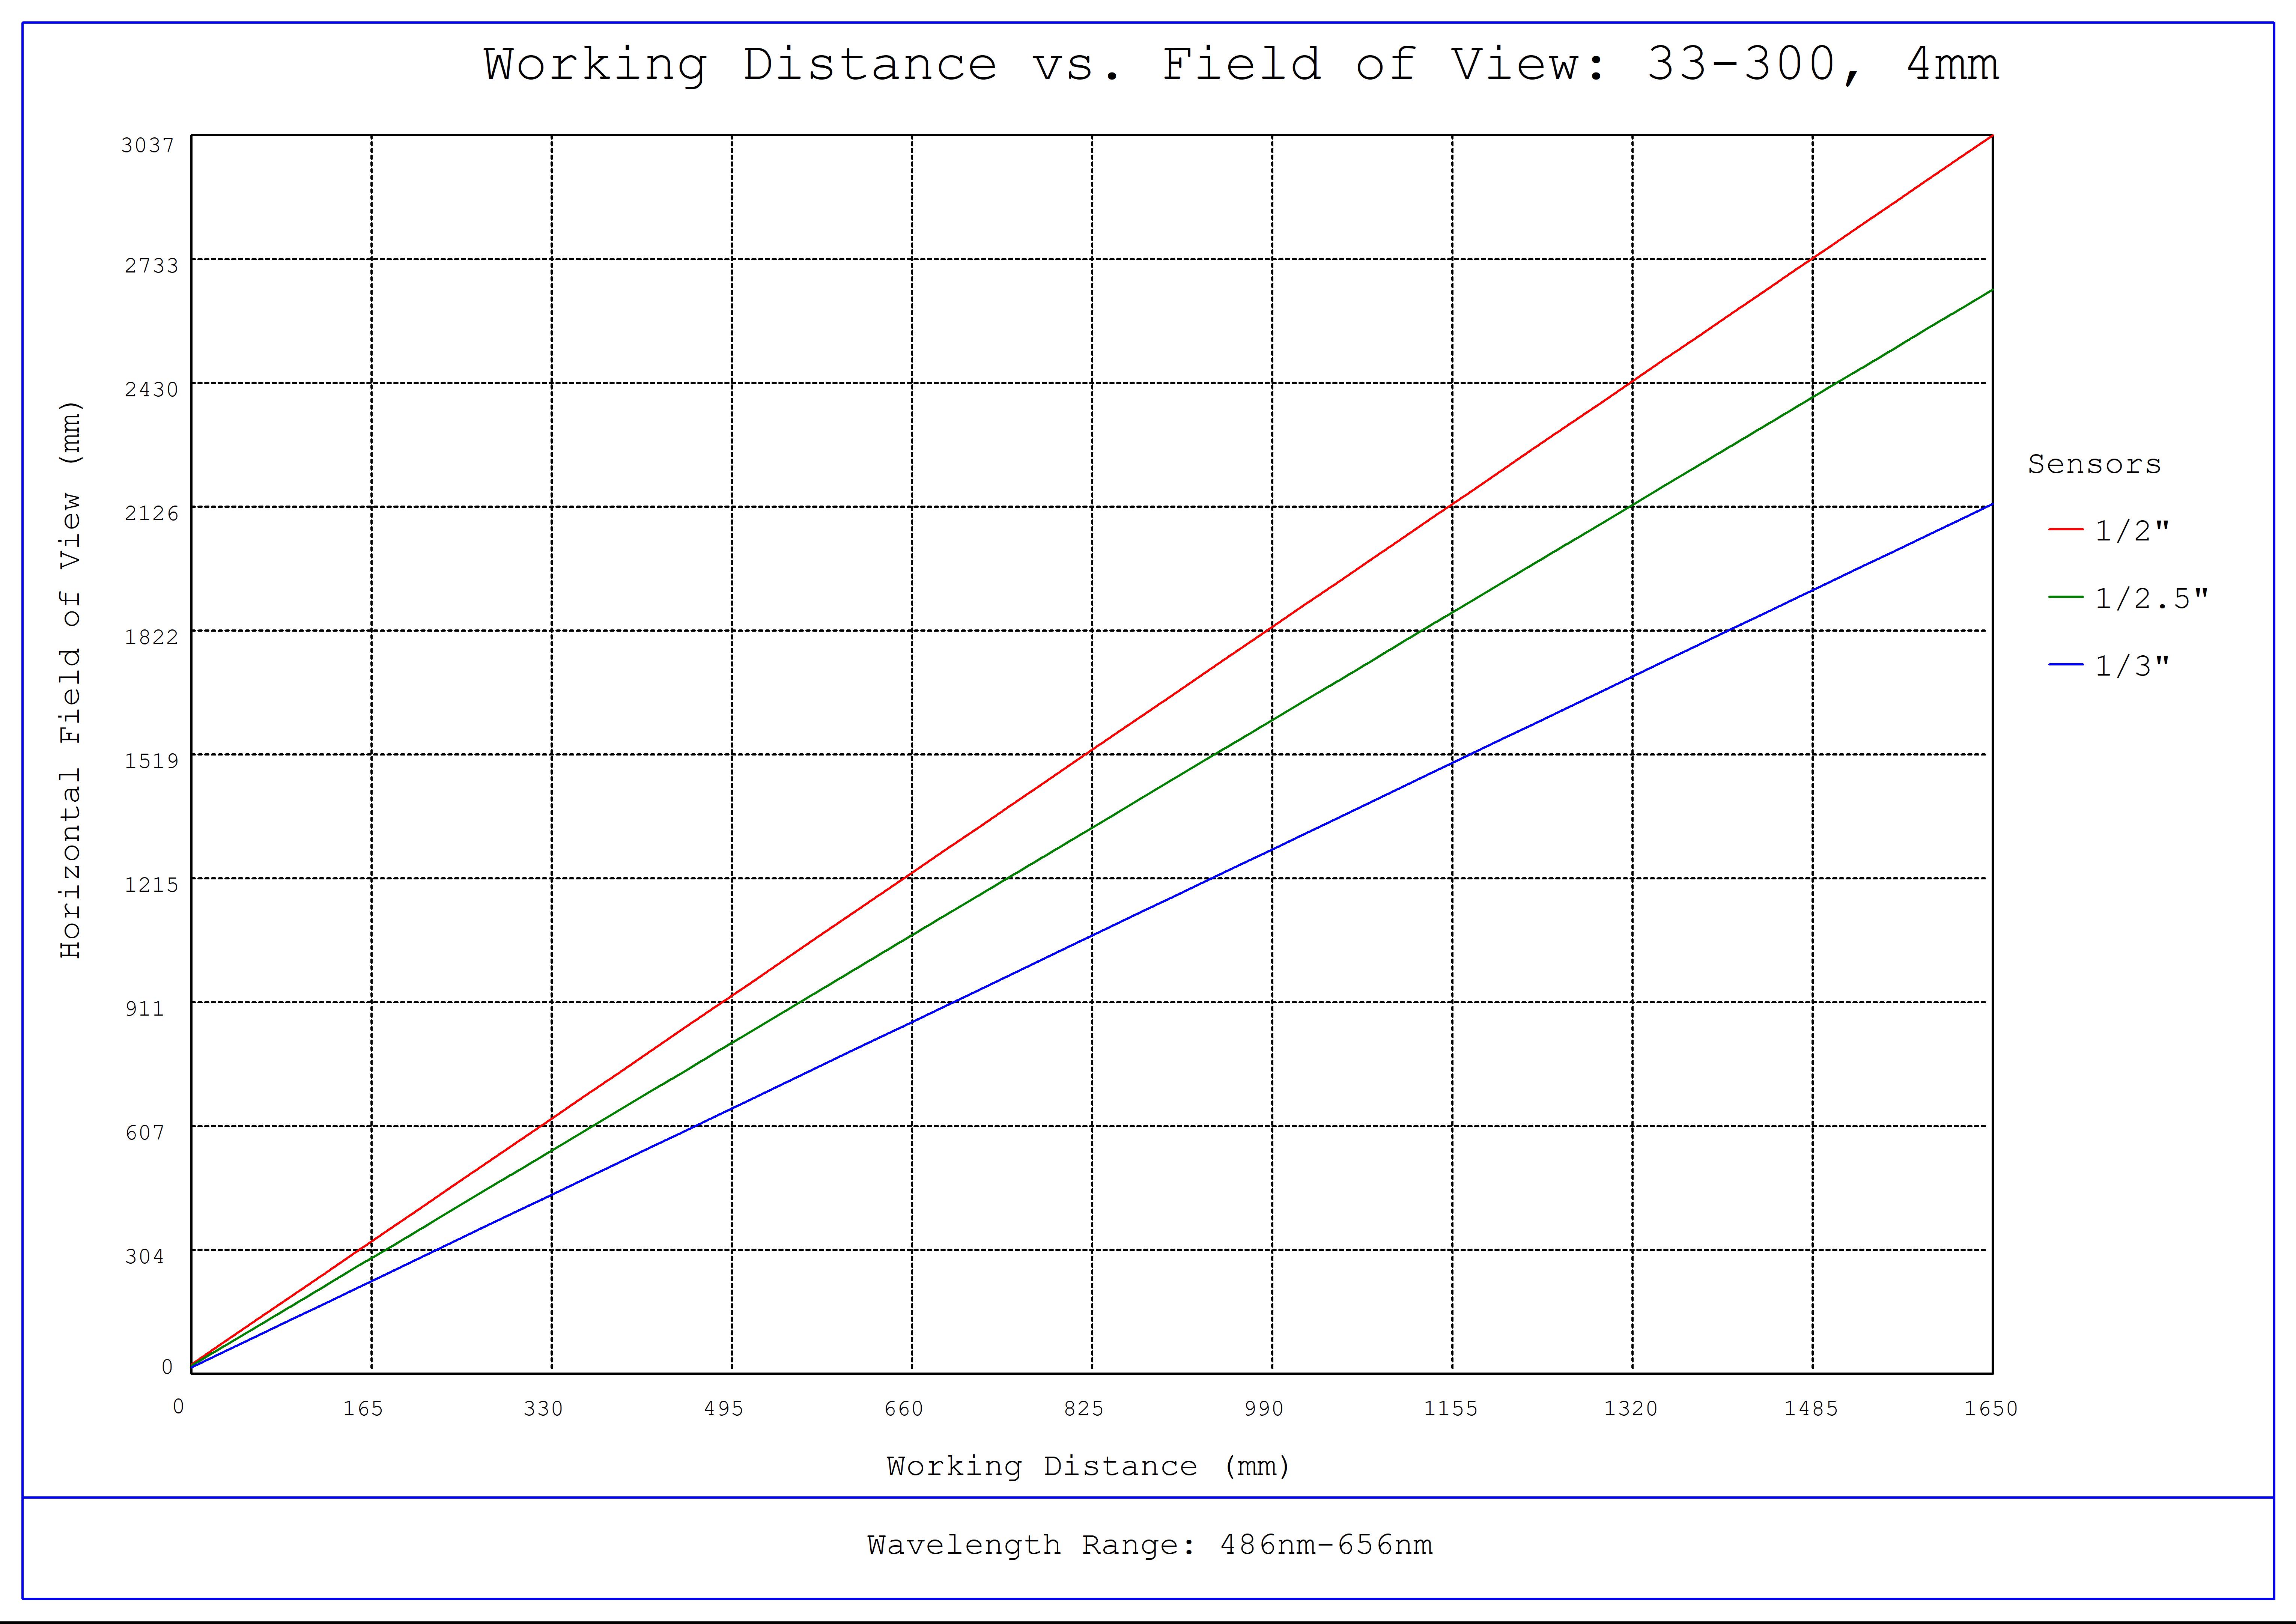 #33-300, 4mm UC Series Fixed Focal Length Lens, Working Distance versus Field of View Plot